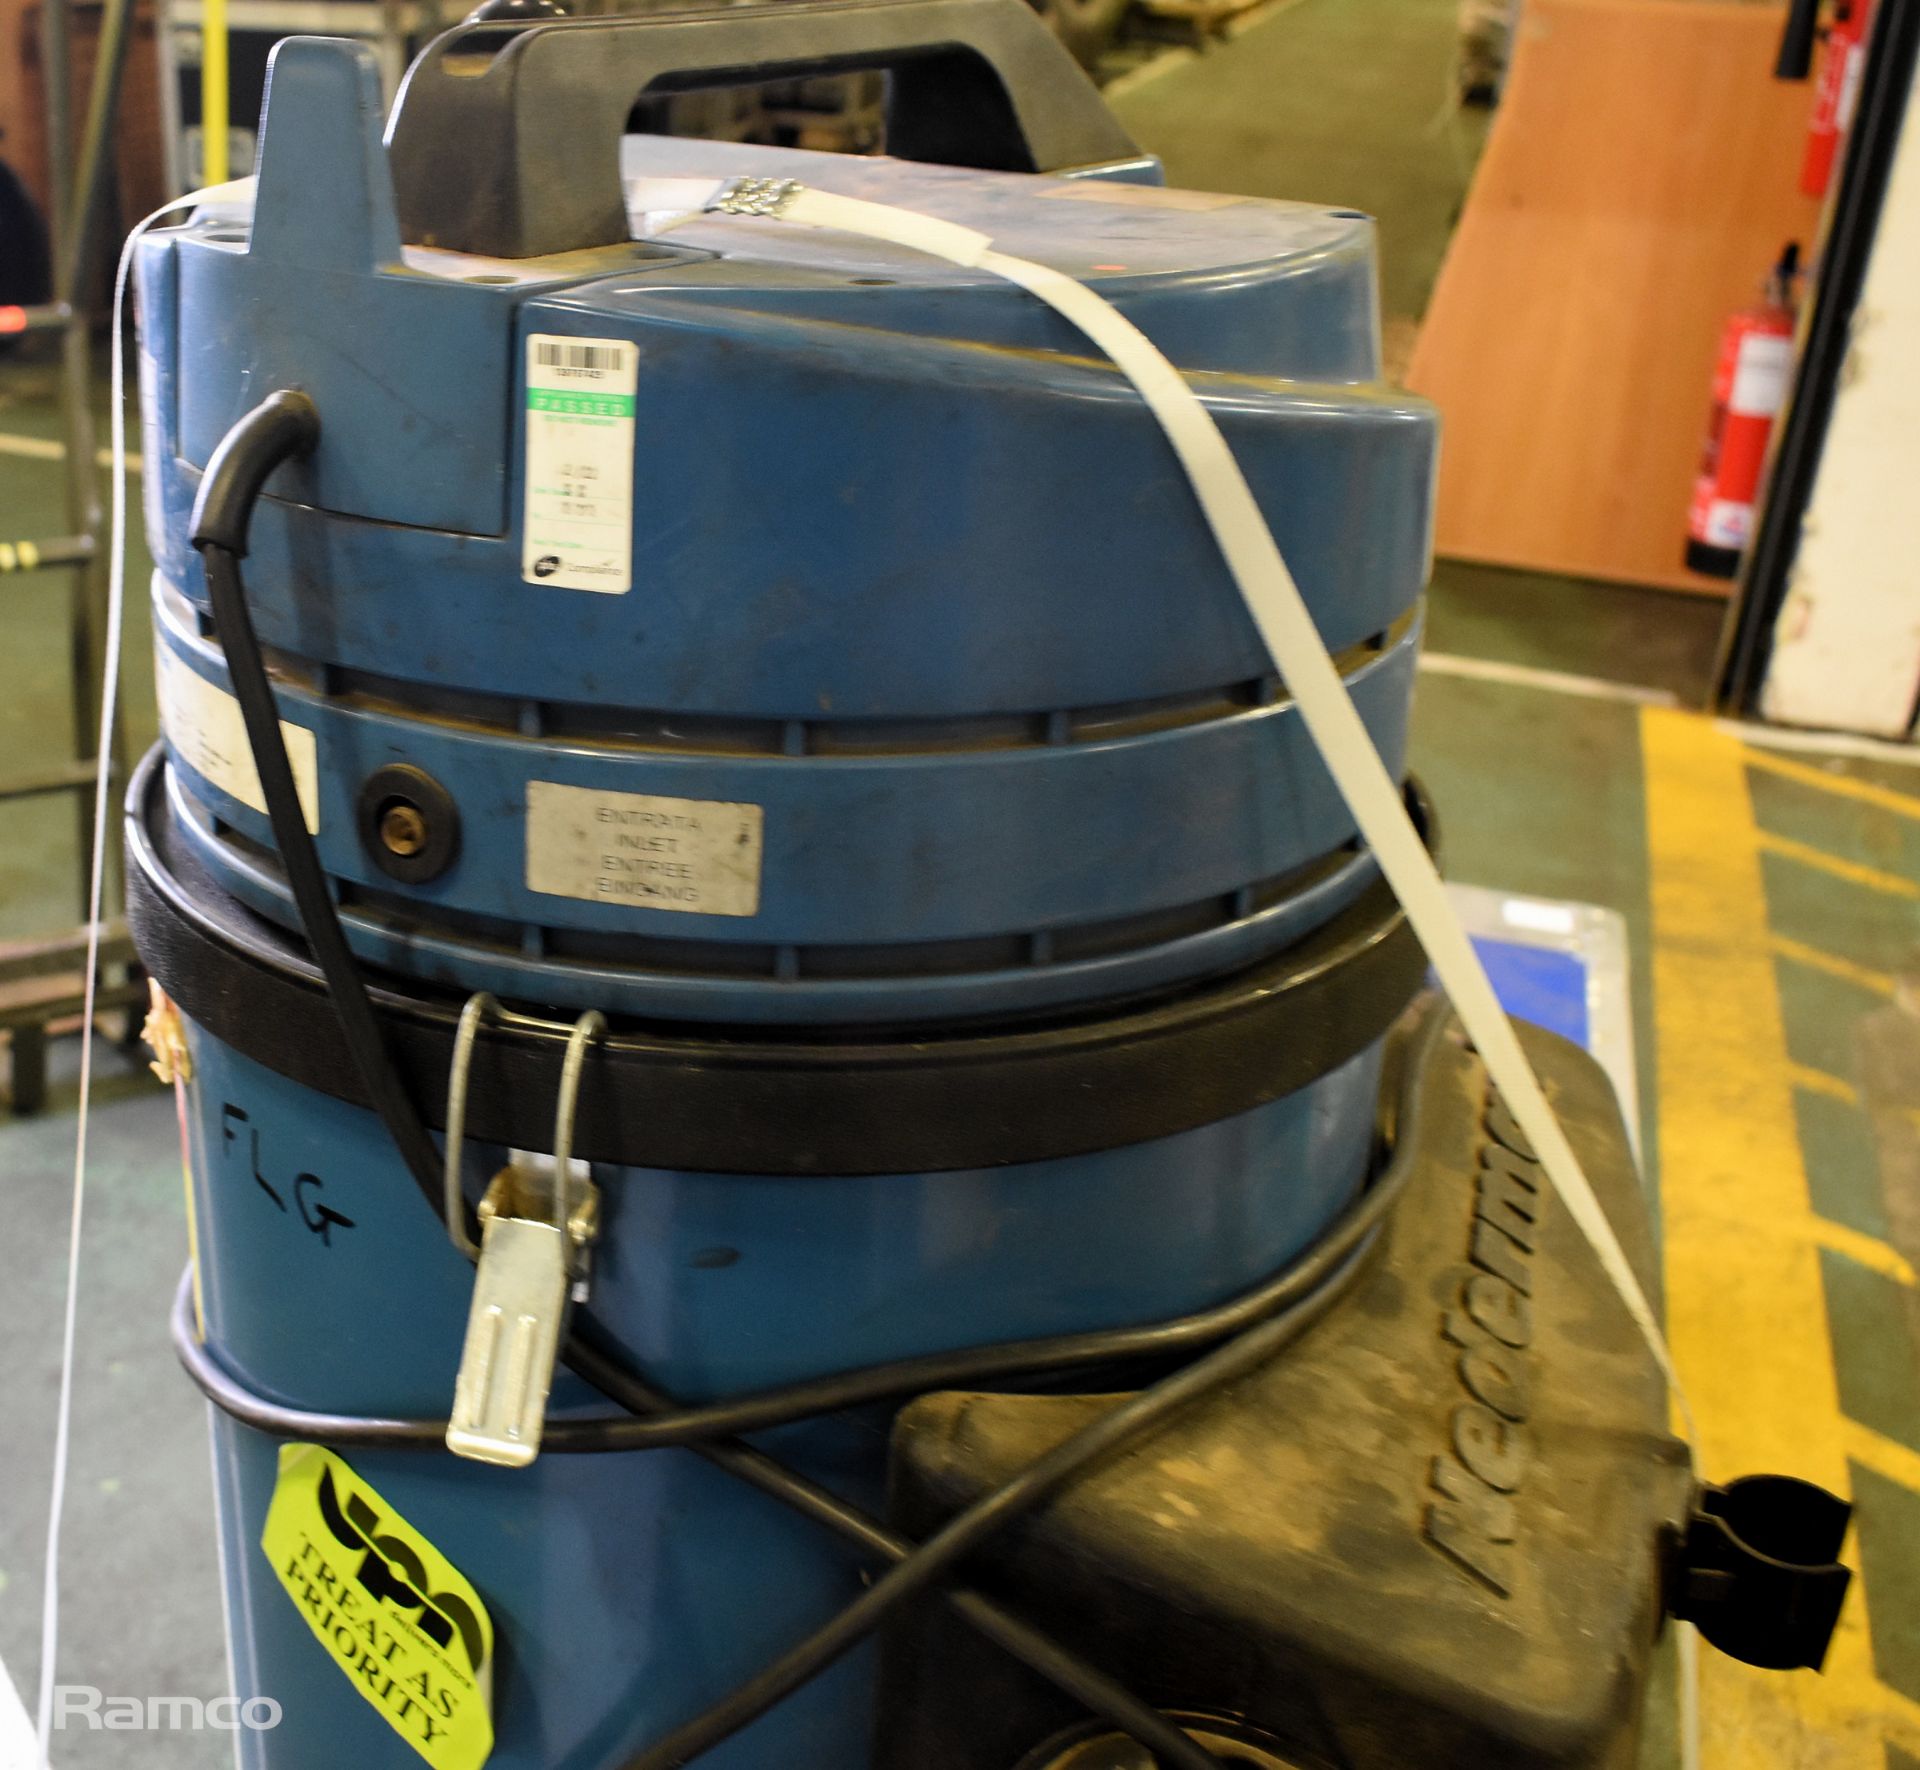 Nederman P300 portable dust extractor - Image 5 of 6